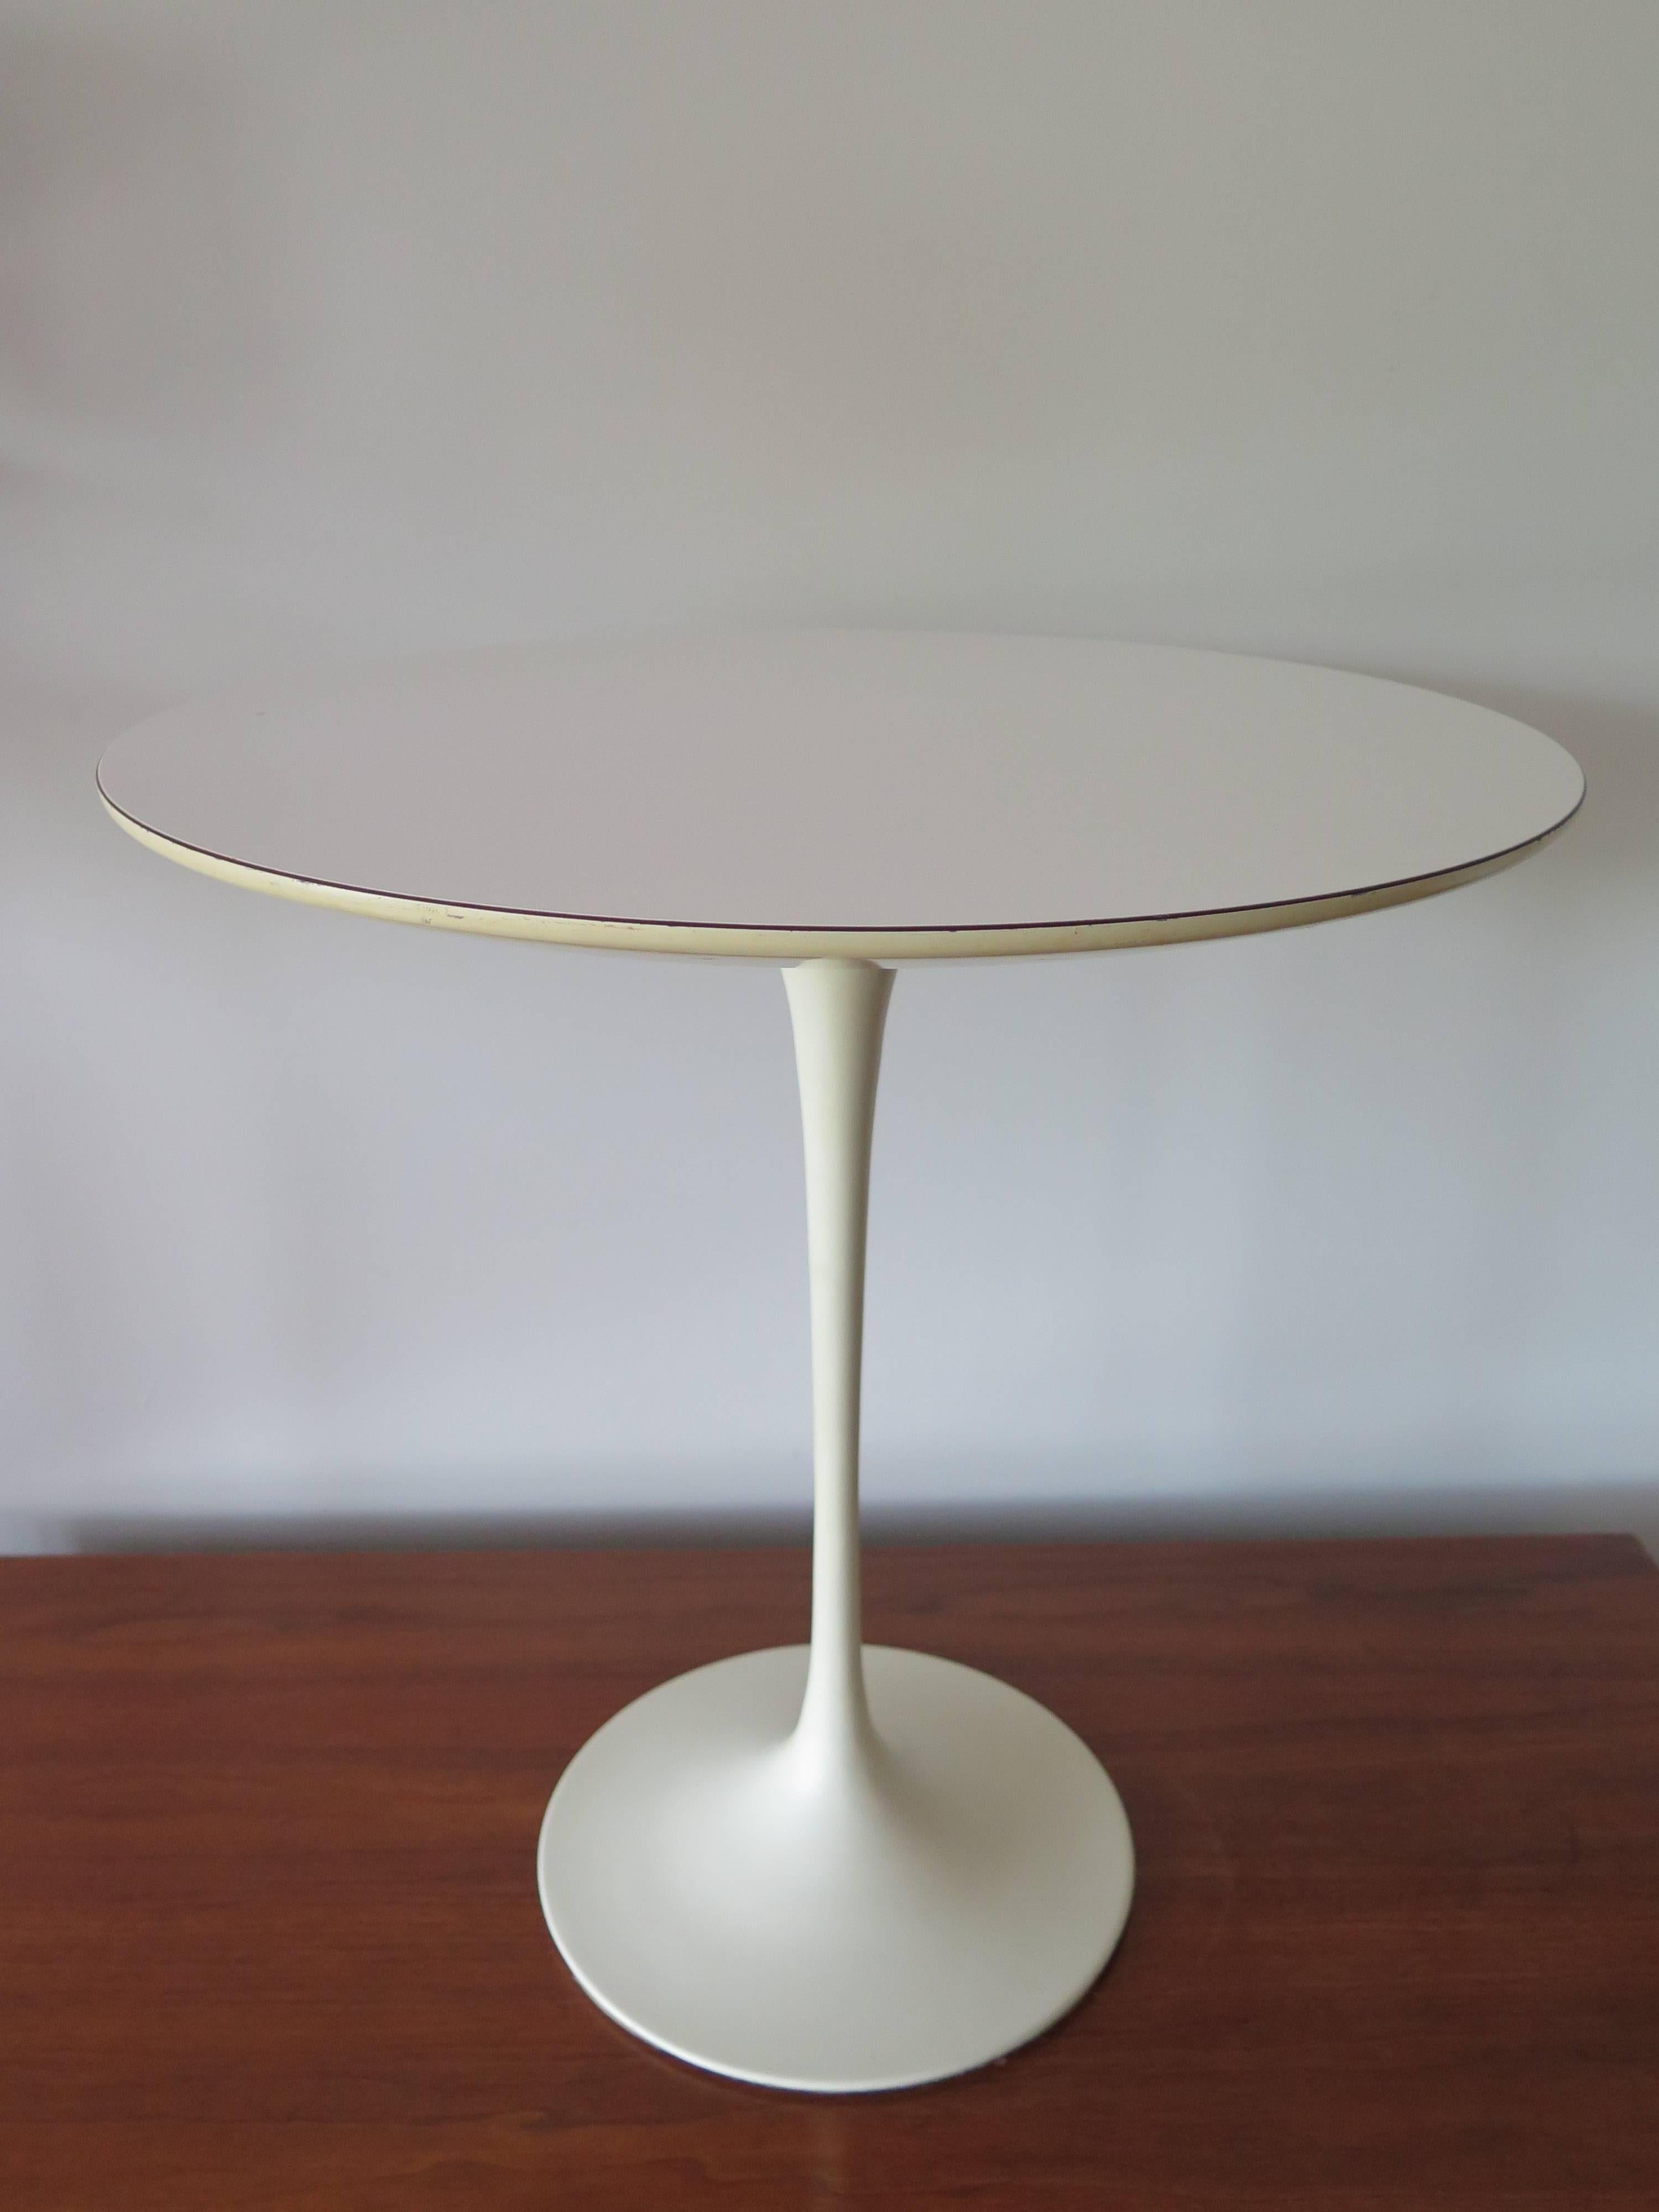 A vintage Eero Saarinen for Knoll pedestal table with white top (20